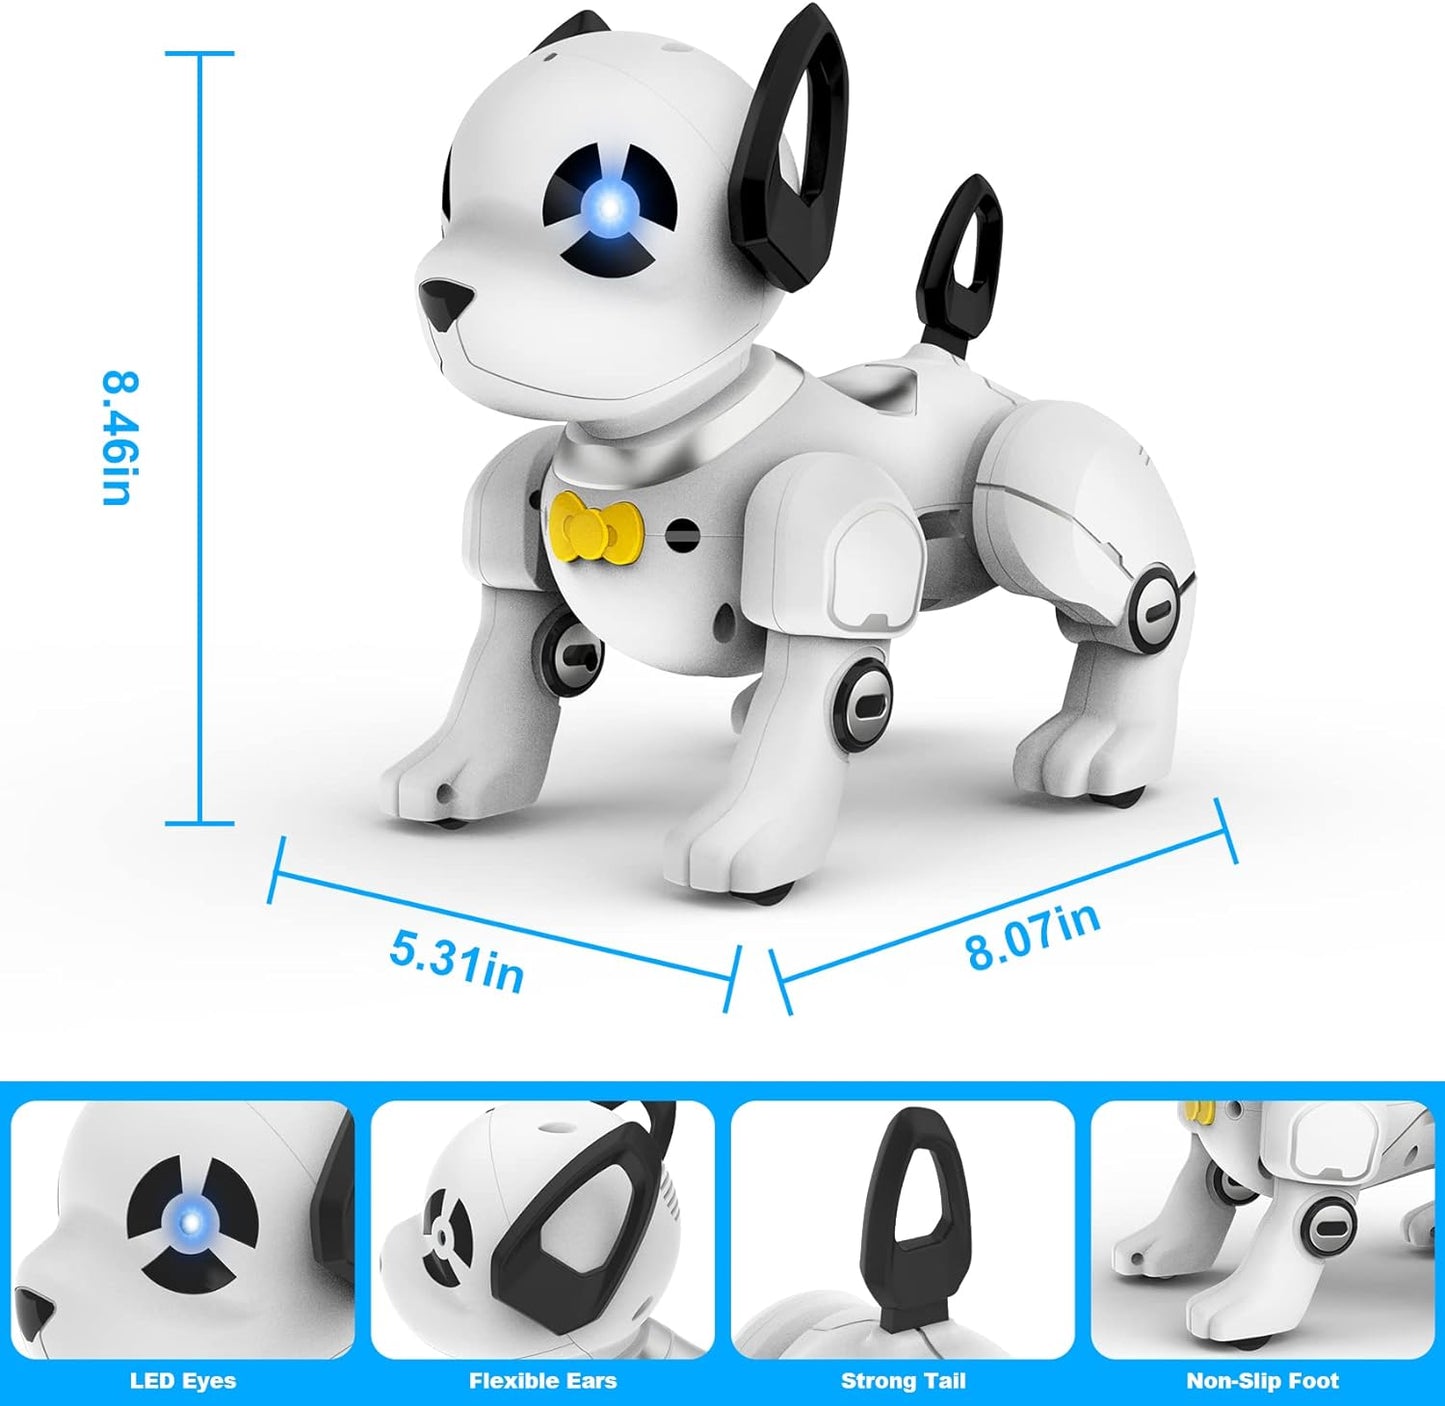 SUPIREO Remote Control Robot Dog Toy, RC Dog Programmable Smart Interactive Robotic Pets, RC Stunt Robot Toys Dog Imitates Animals Music Dancing Handstand Push-up Follow Functions for Boys Girls Toy